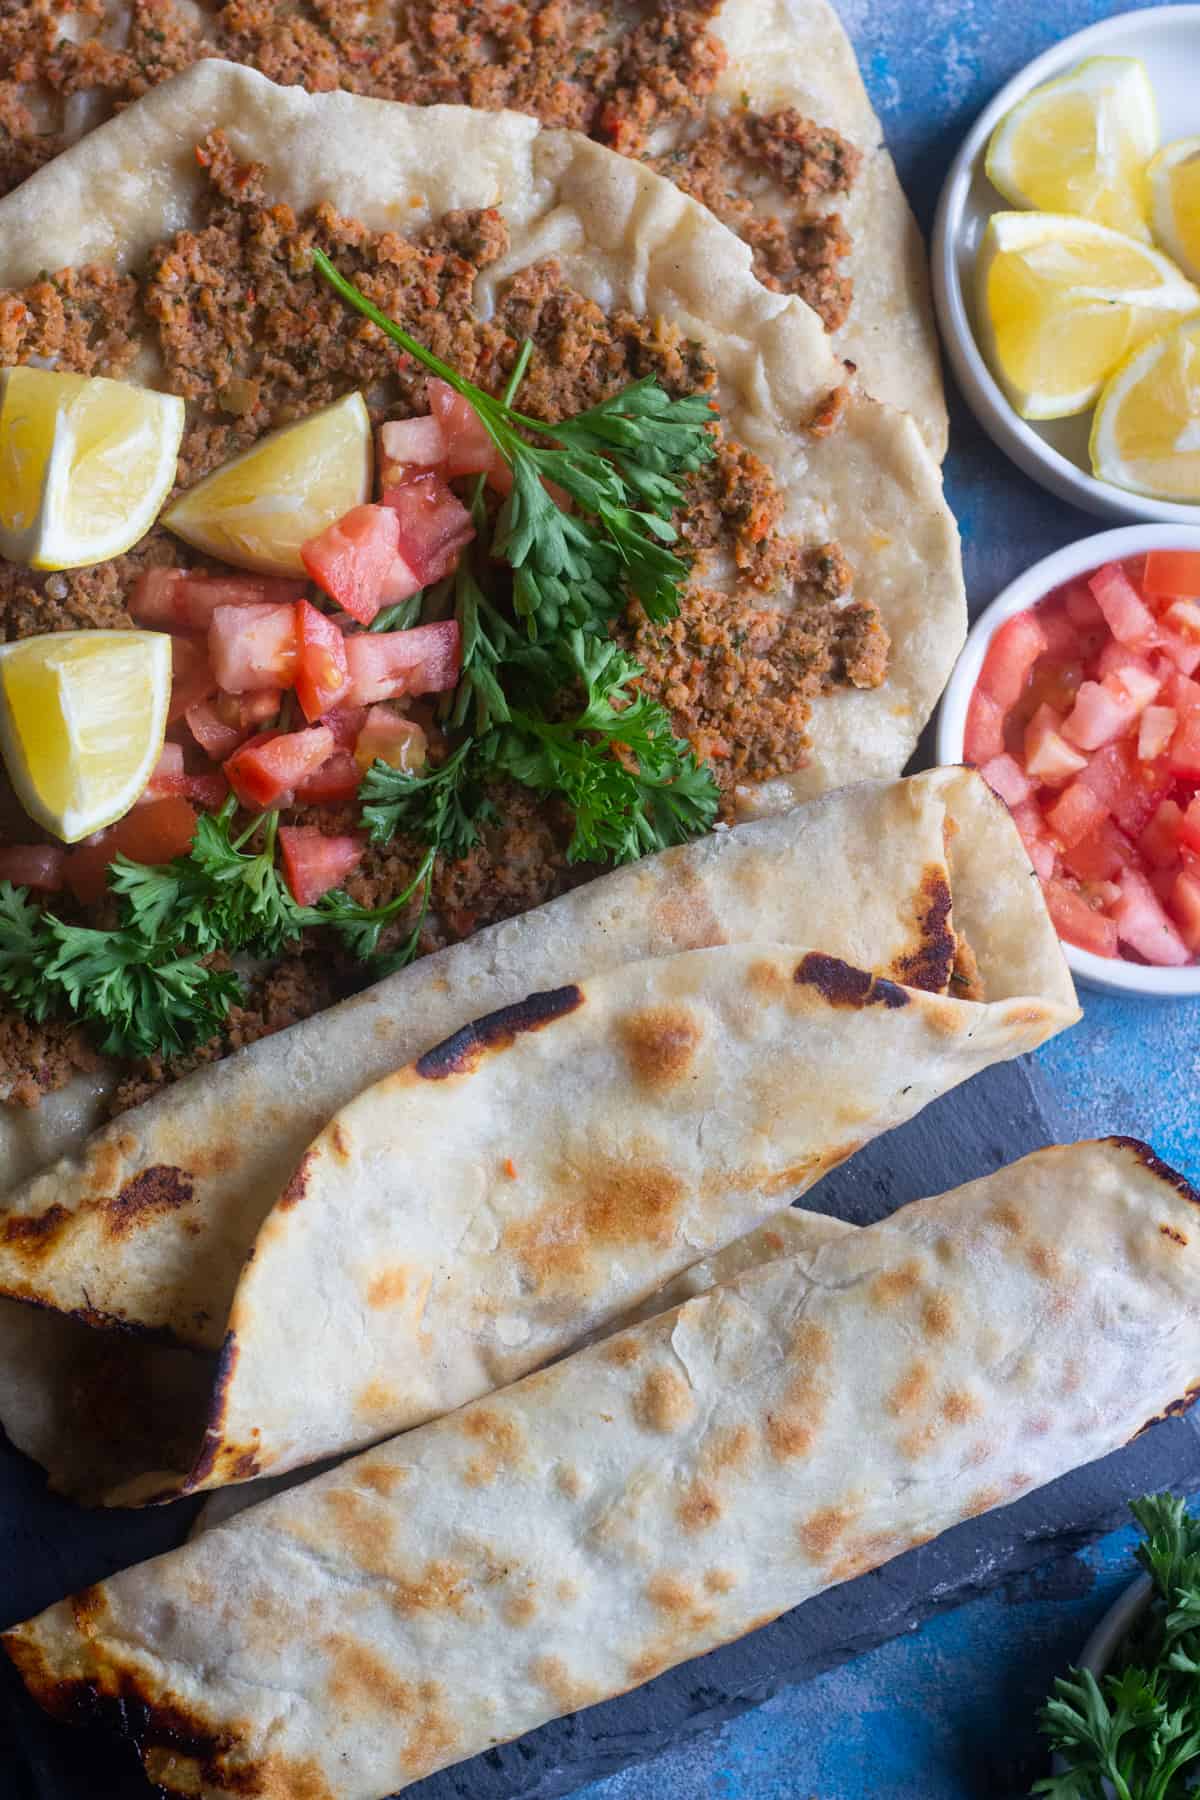 Lahmacun is of Middle Eastern origin and comes from the Levent. This meat and vegetable flatbread is popular in Turkey, Armenia, Lebanon and Syria which were formerly part of the Ottoman empire.